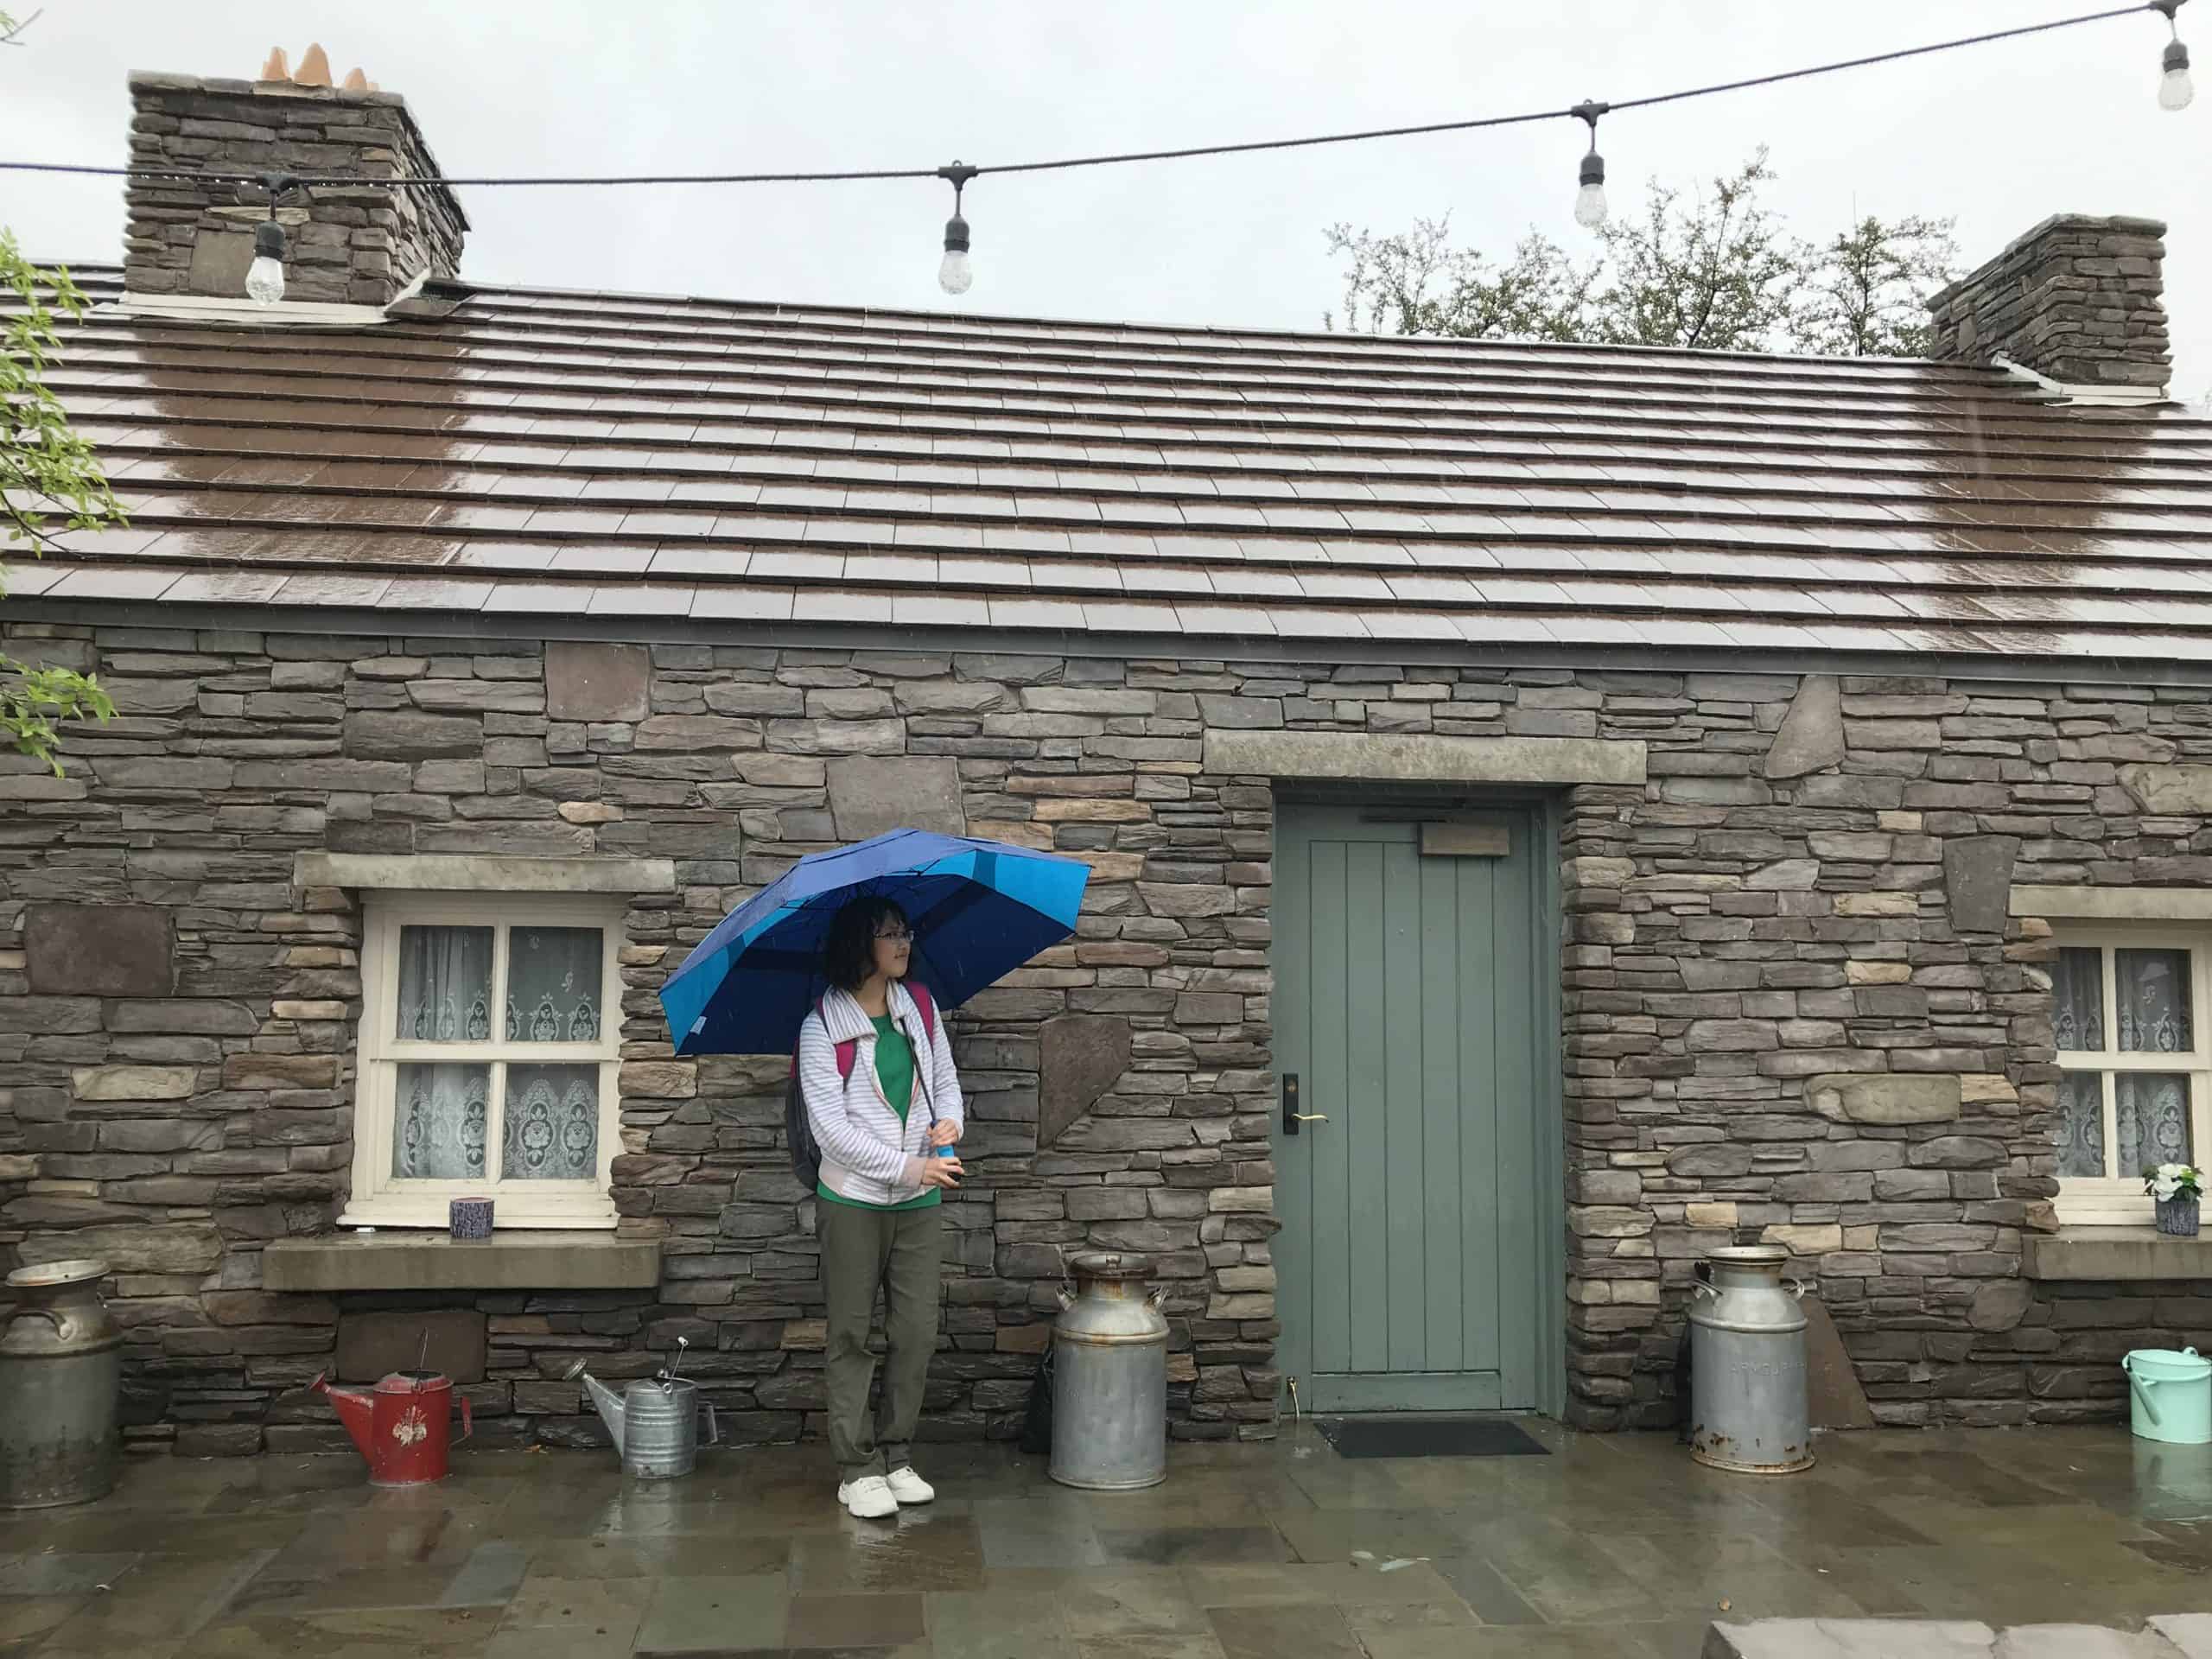 In Phoenix, Arizona, United States's Irish Cultural Center. Meggie is standing underneath a blue umbrella as it's raining. Behind her is a replica traditional Irish stone cottage.